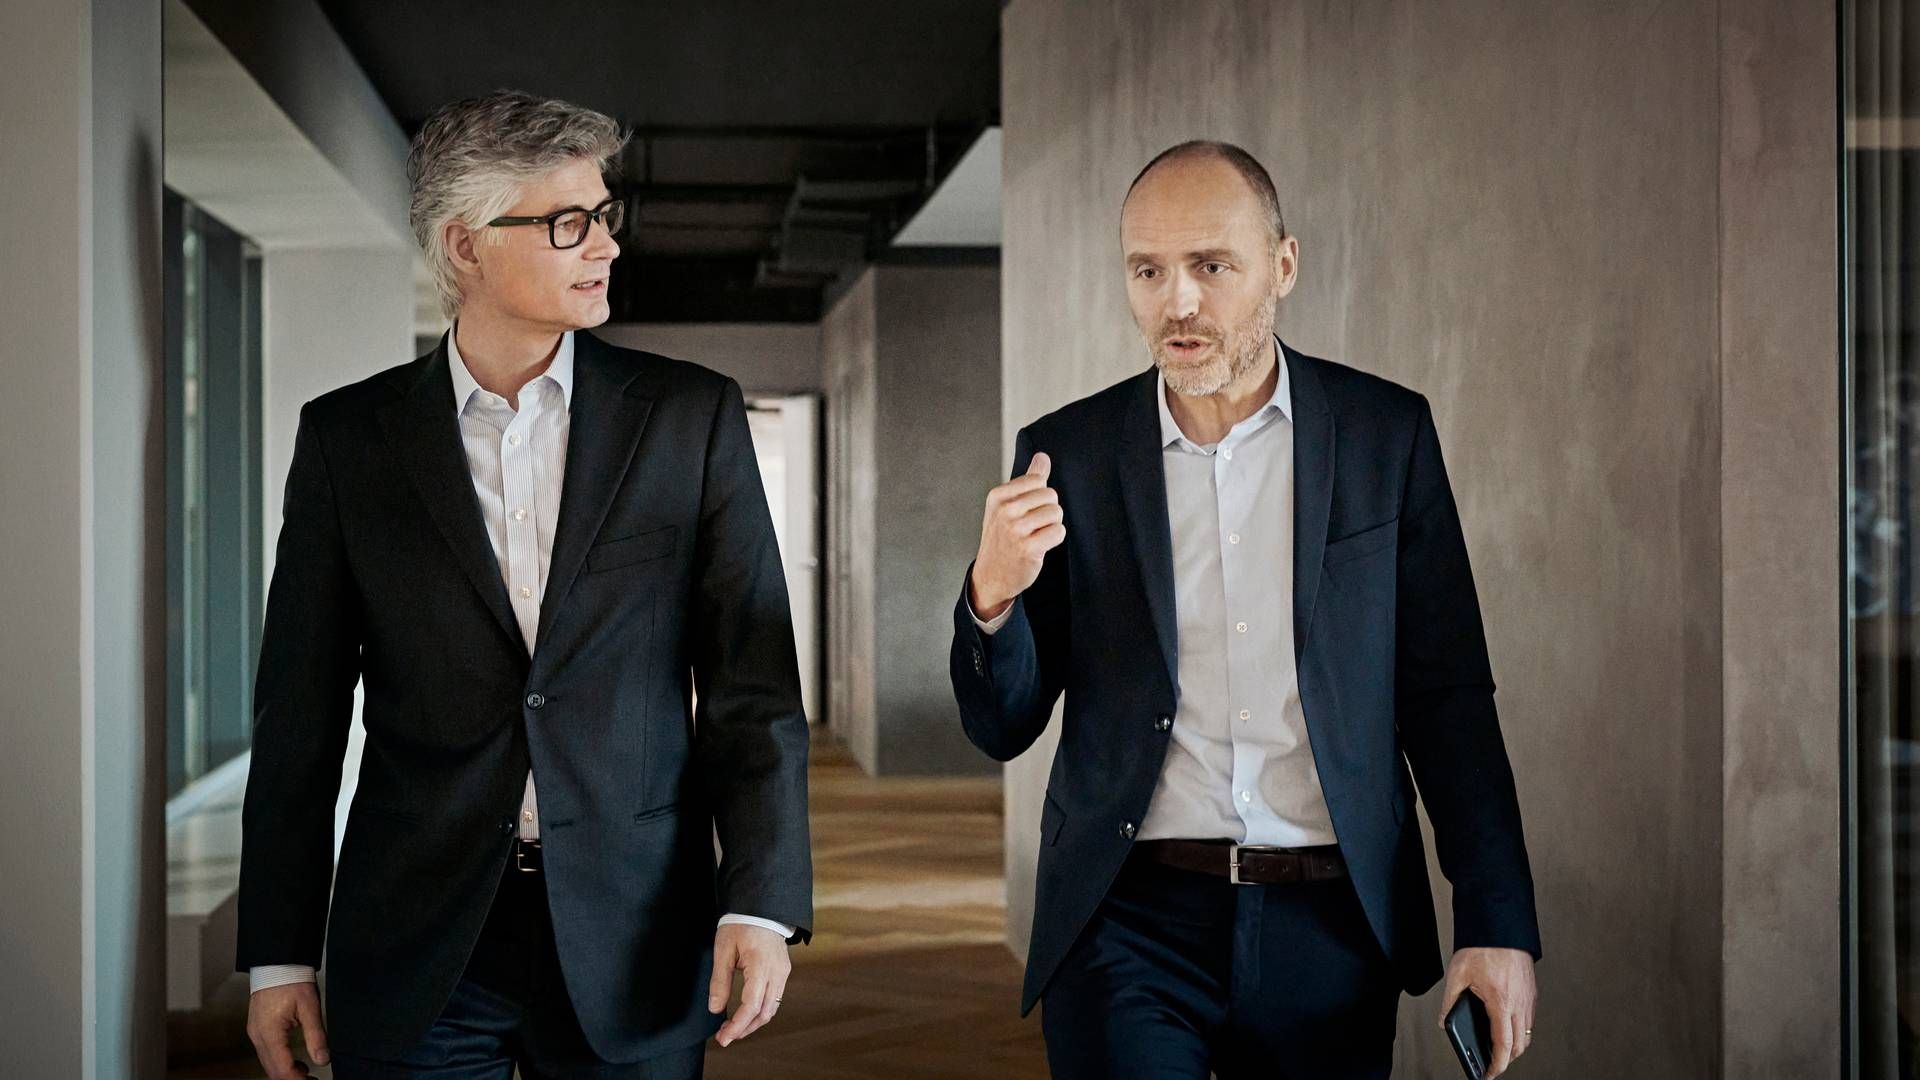 The founders of Capital Four, Torben Skødeberg and Sandro Näf. | Photo: PR: Capital Four